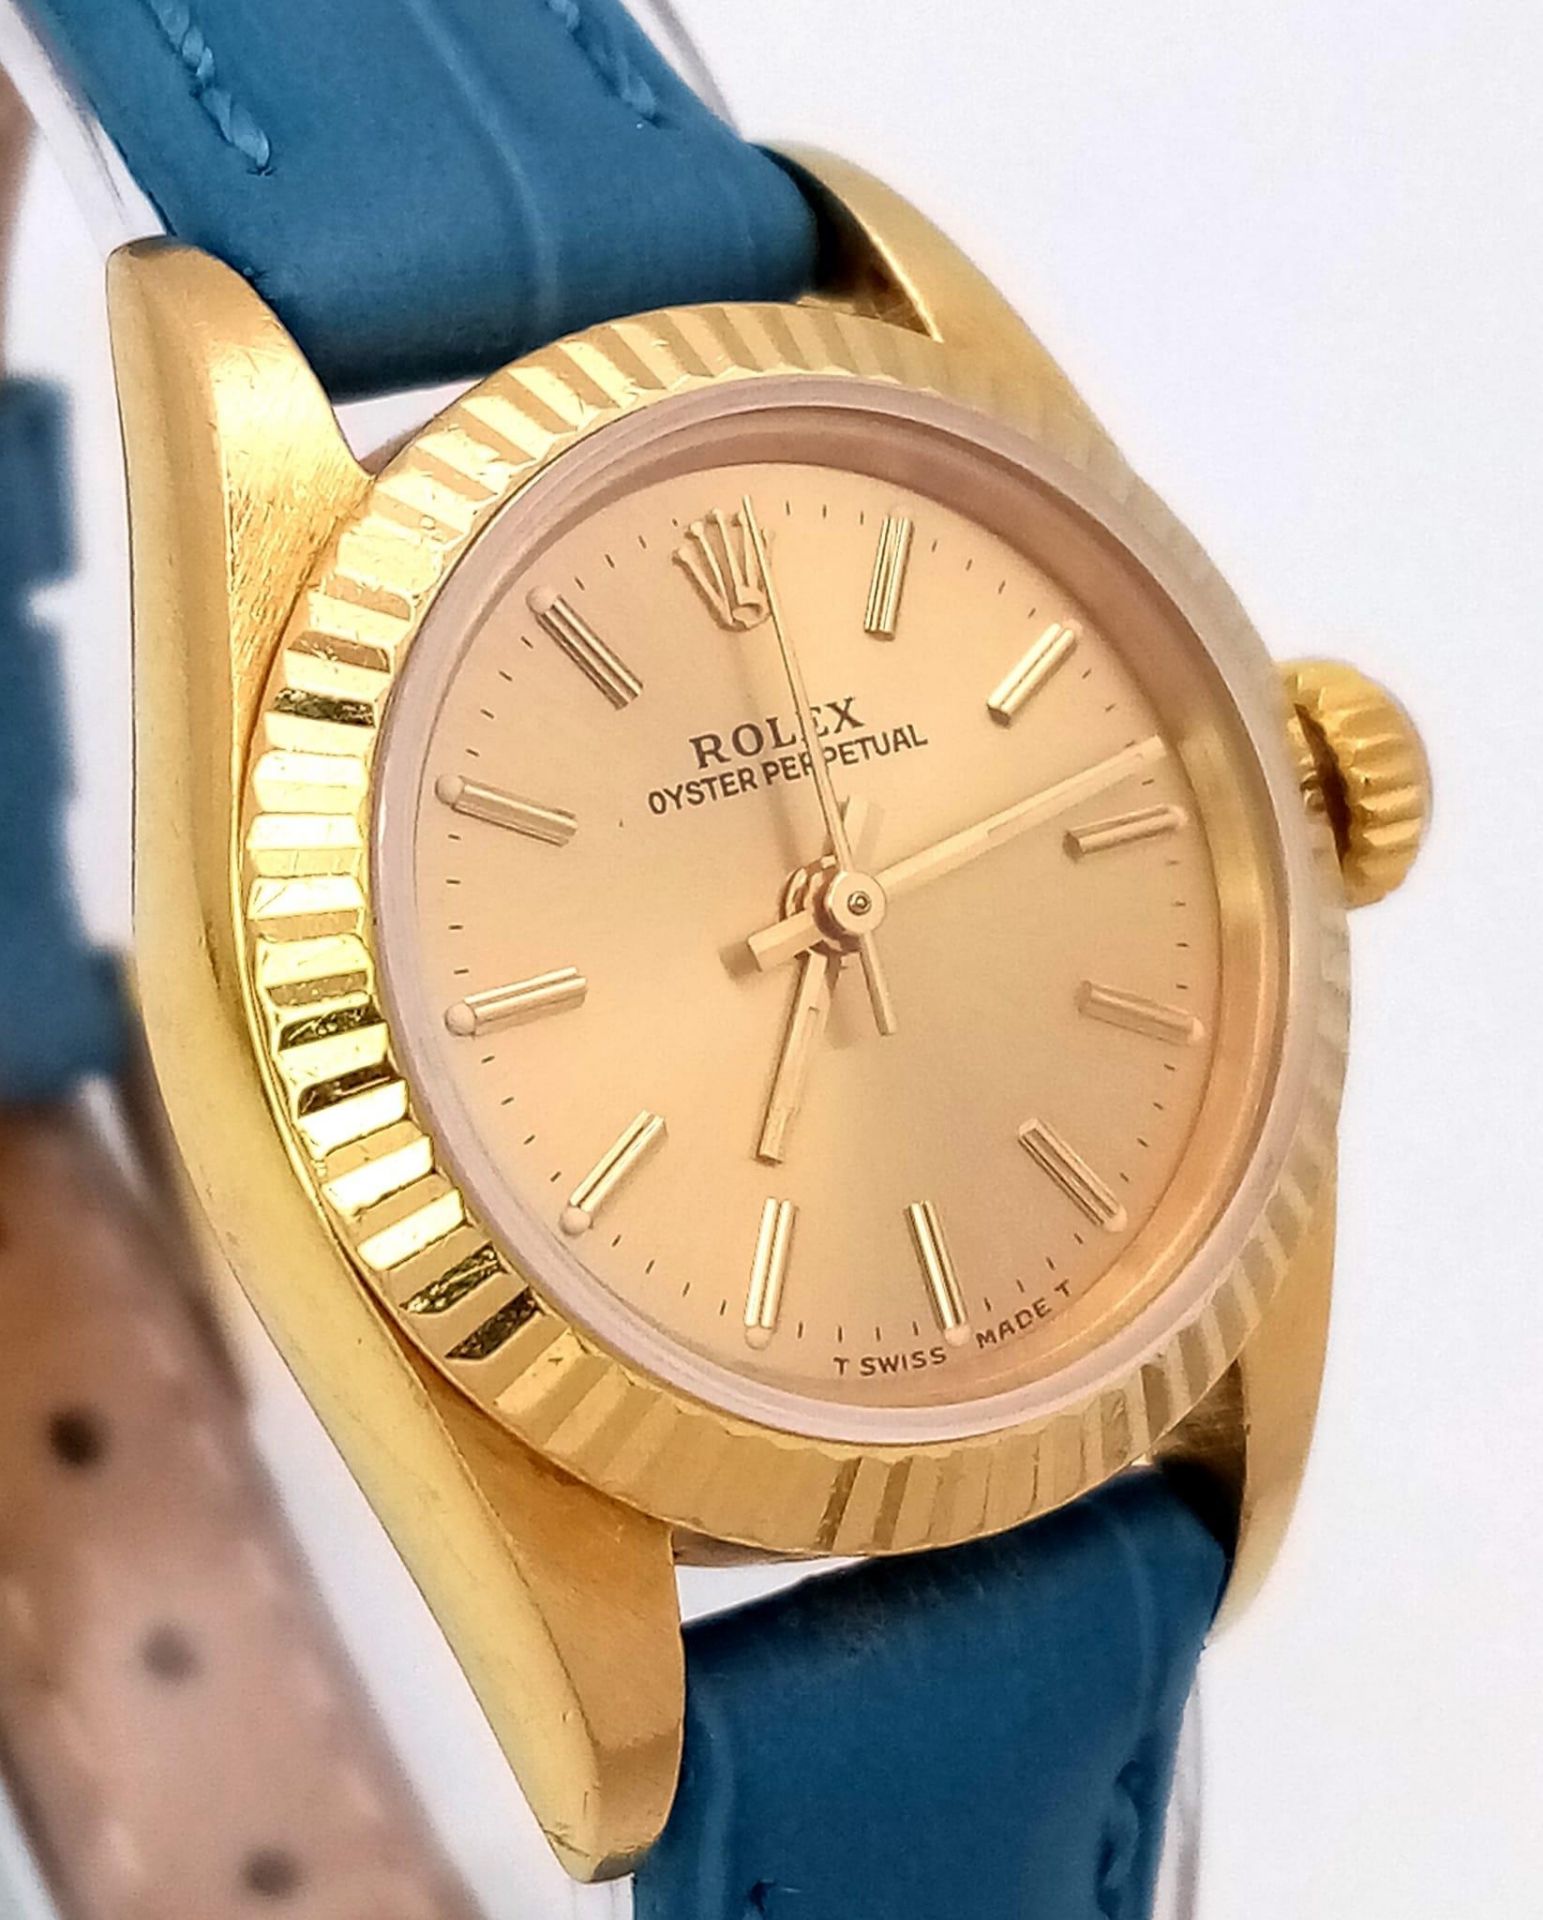 An 18k Gold Rolex Oyster Perpetual Ladies Watch. Blue leather strap. 18k gold case - 25mm. Gold tone - Image 4 of 10